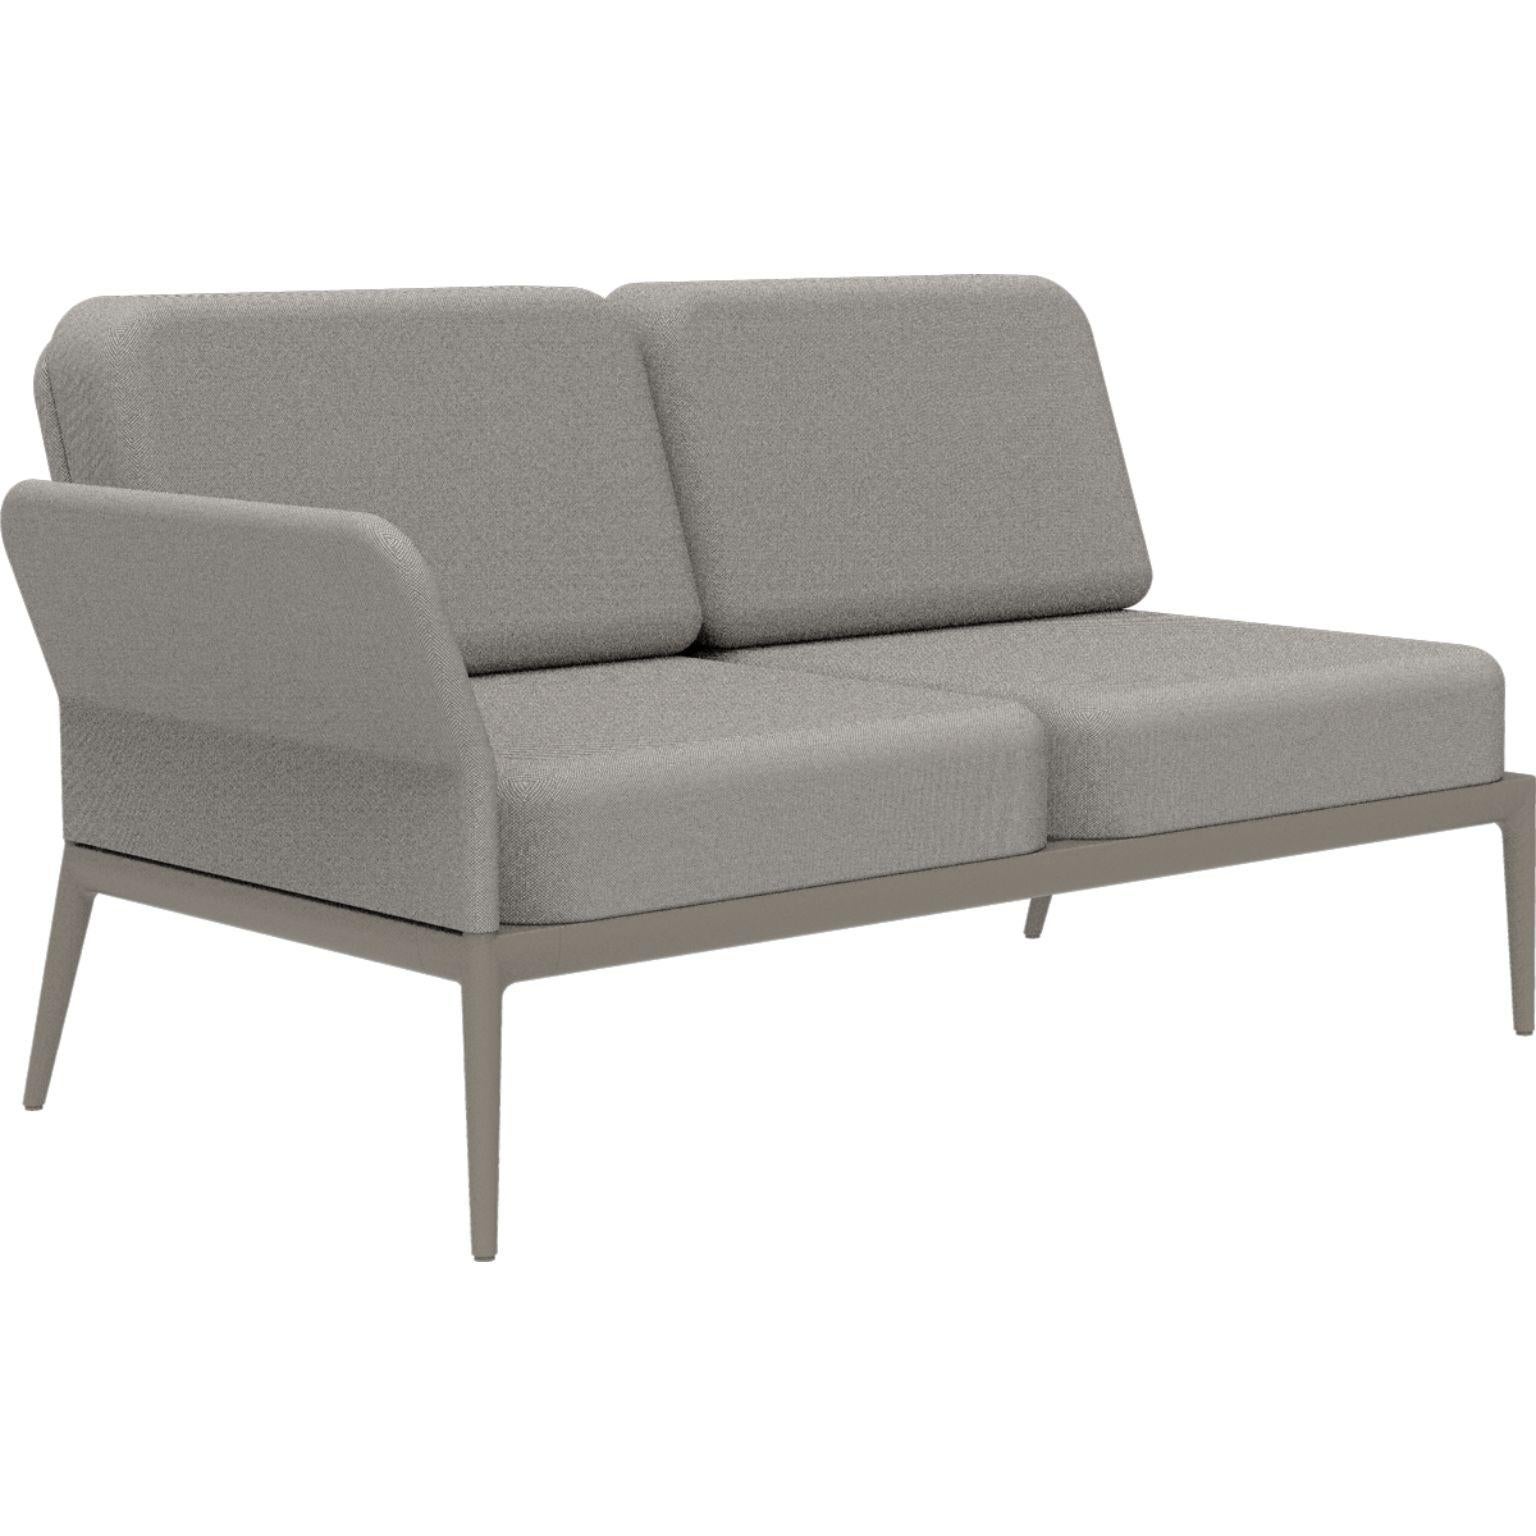 Cover Cream Double Right Modular Sofa by MOWEE
Dimensions: D83 x W148 x H81 cm (seat height 42 cm).
Material: Aluminum and upholstery.
Weight: 29 kg.
Also available in different colors and finishes. 

An unmistakable collection for its beauty